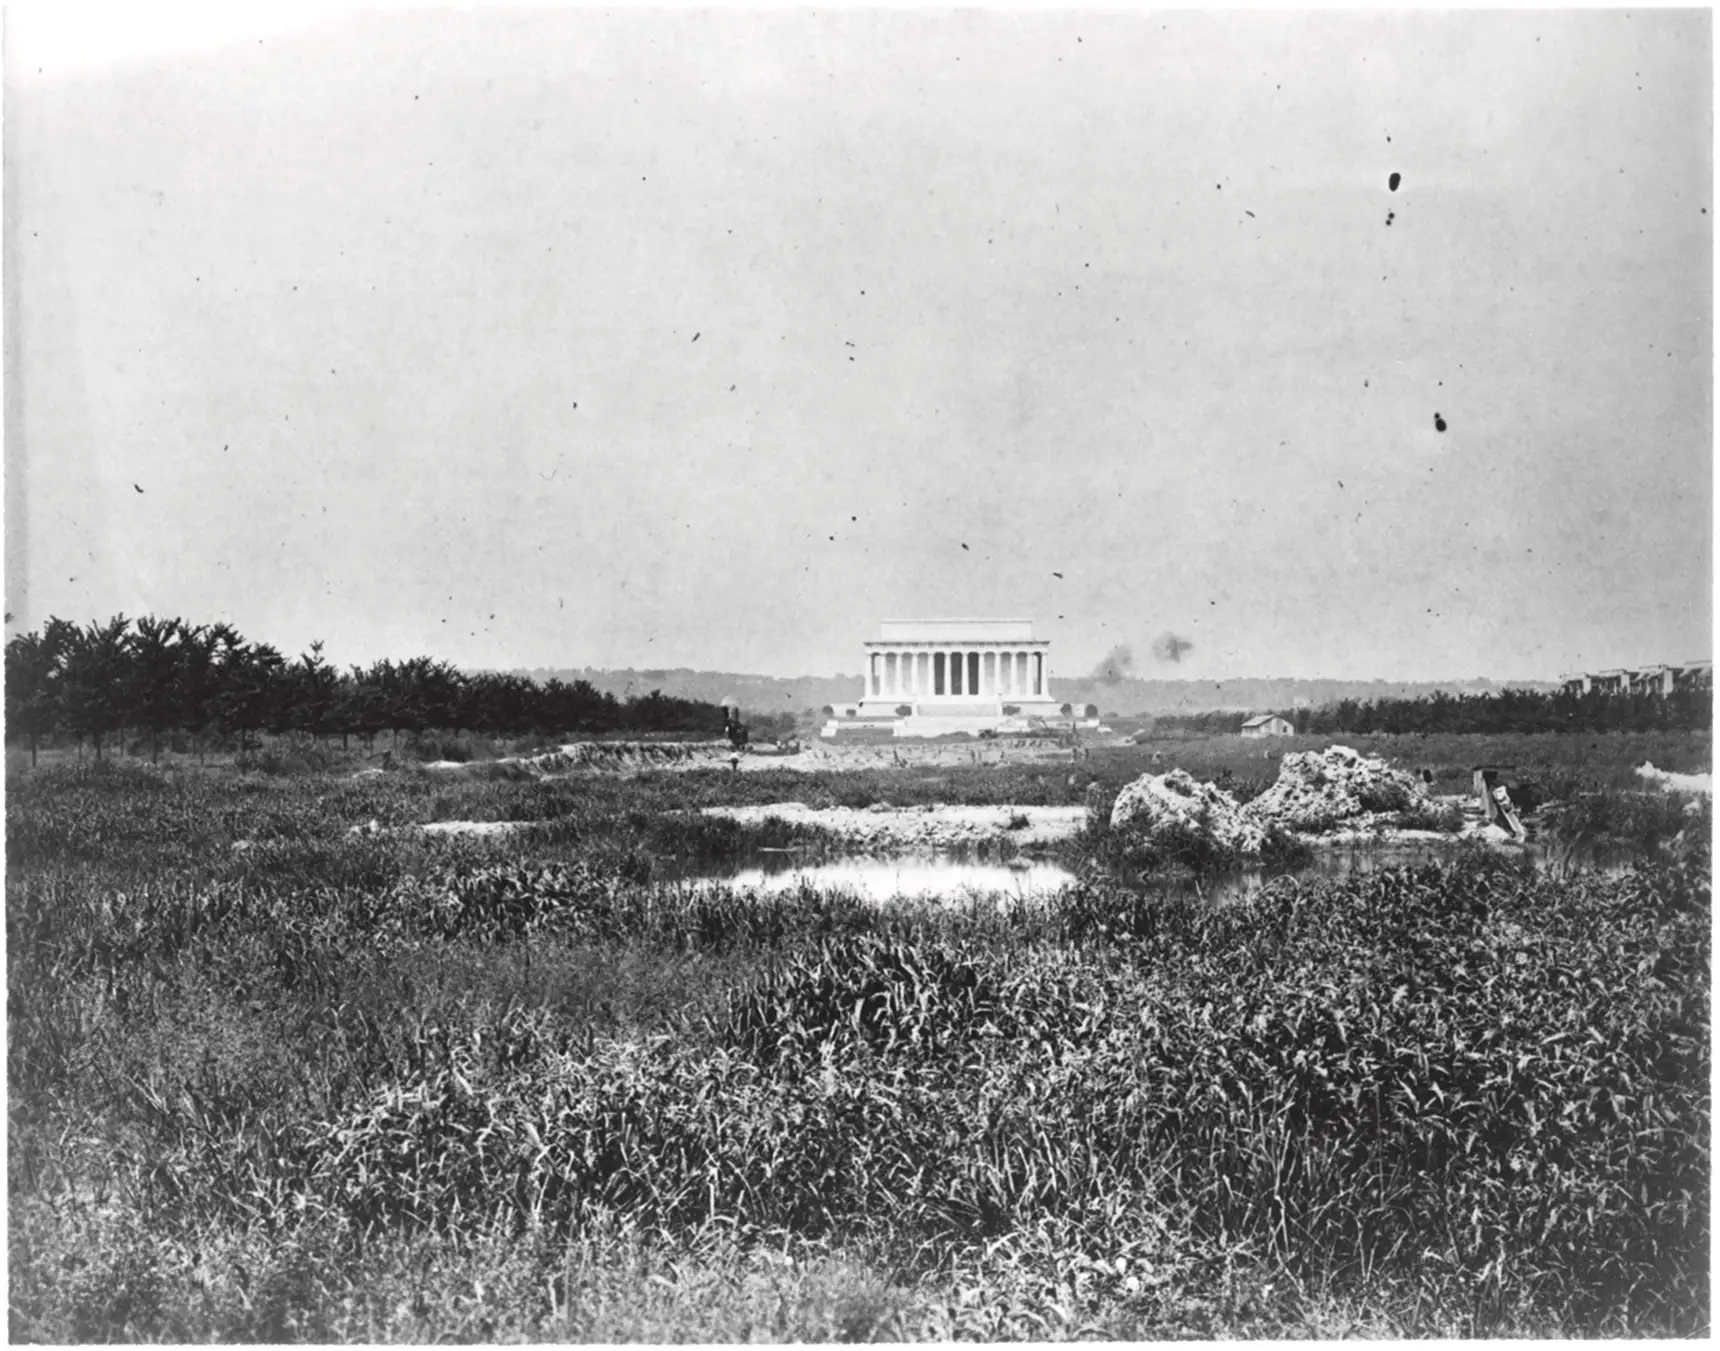 Lincoln Memorial with a marsh